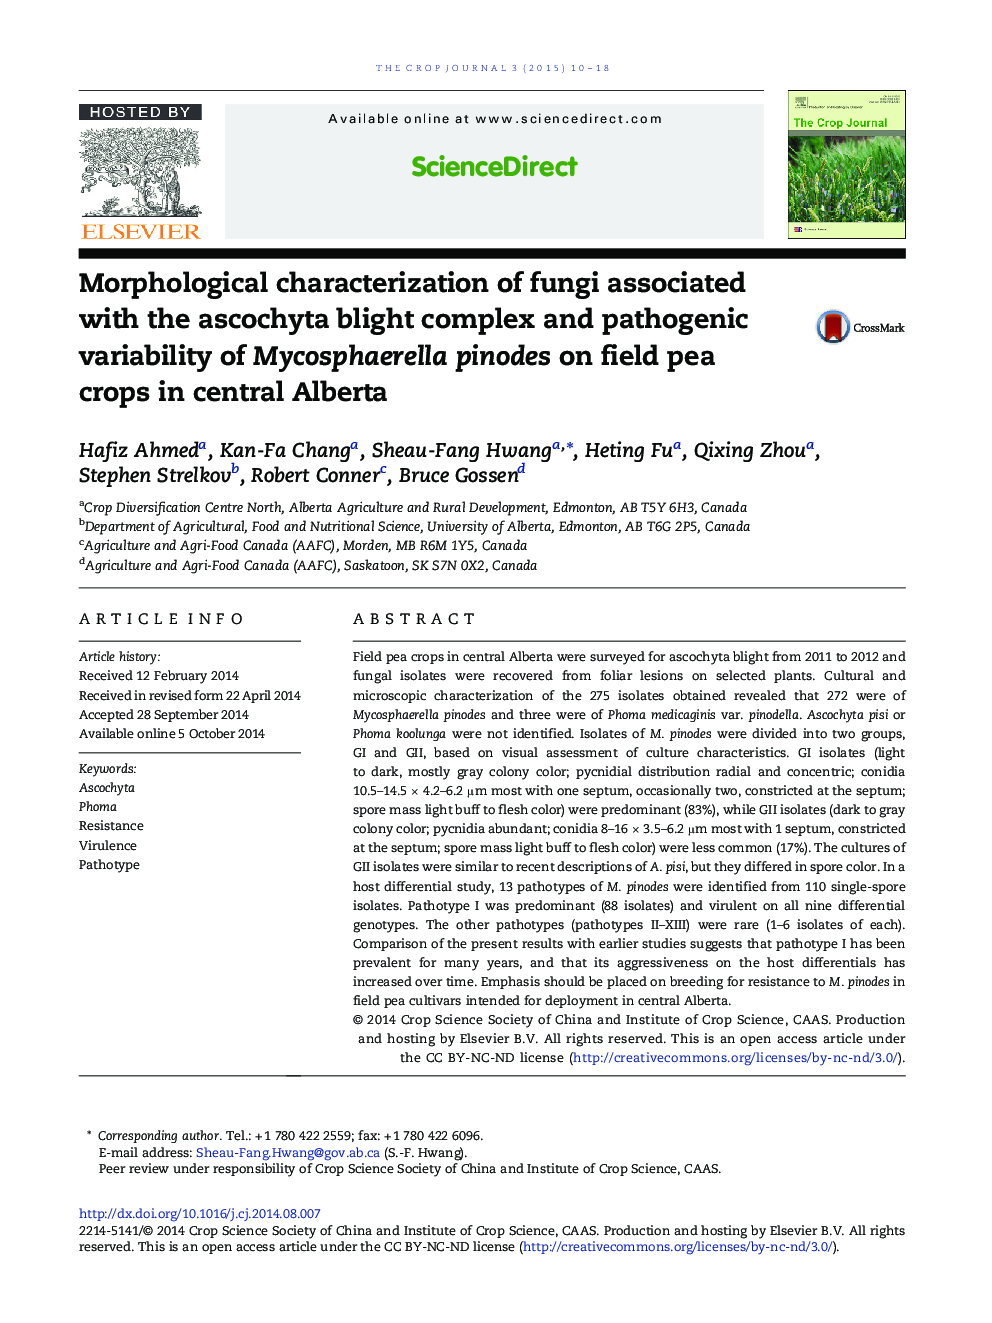 Morphological characterization of fungi associated with the ascochyta blight complex and pathogenic variability of Mycosphaerella pinodes on field pea crops in central Alberta